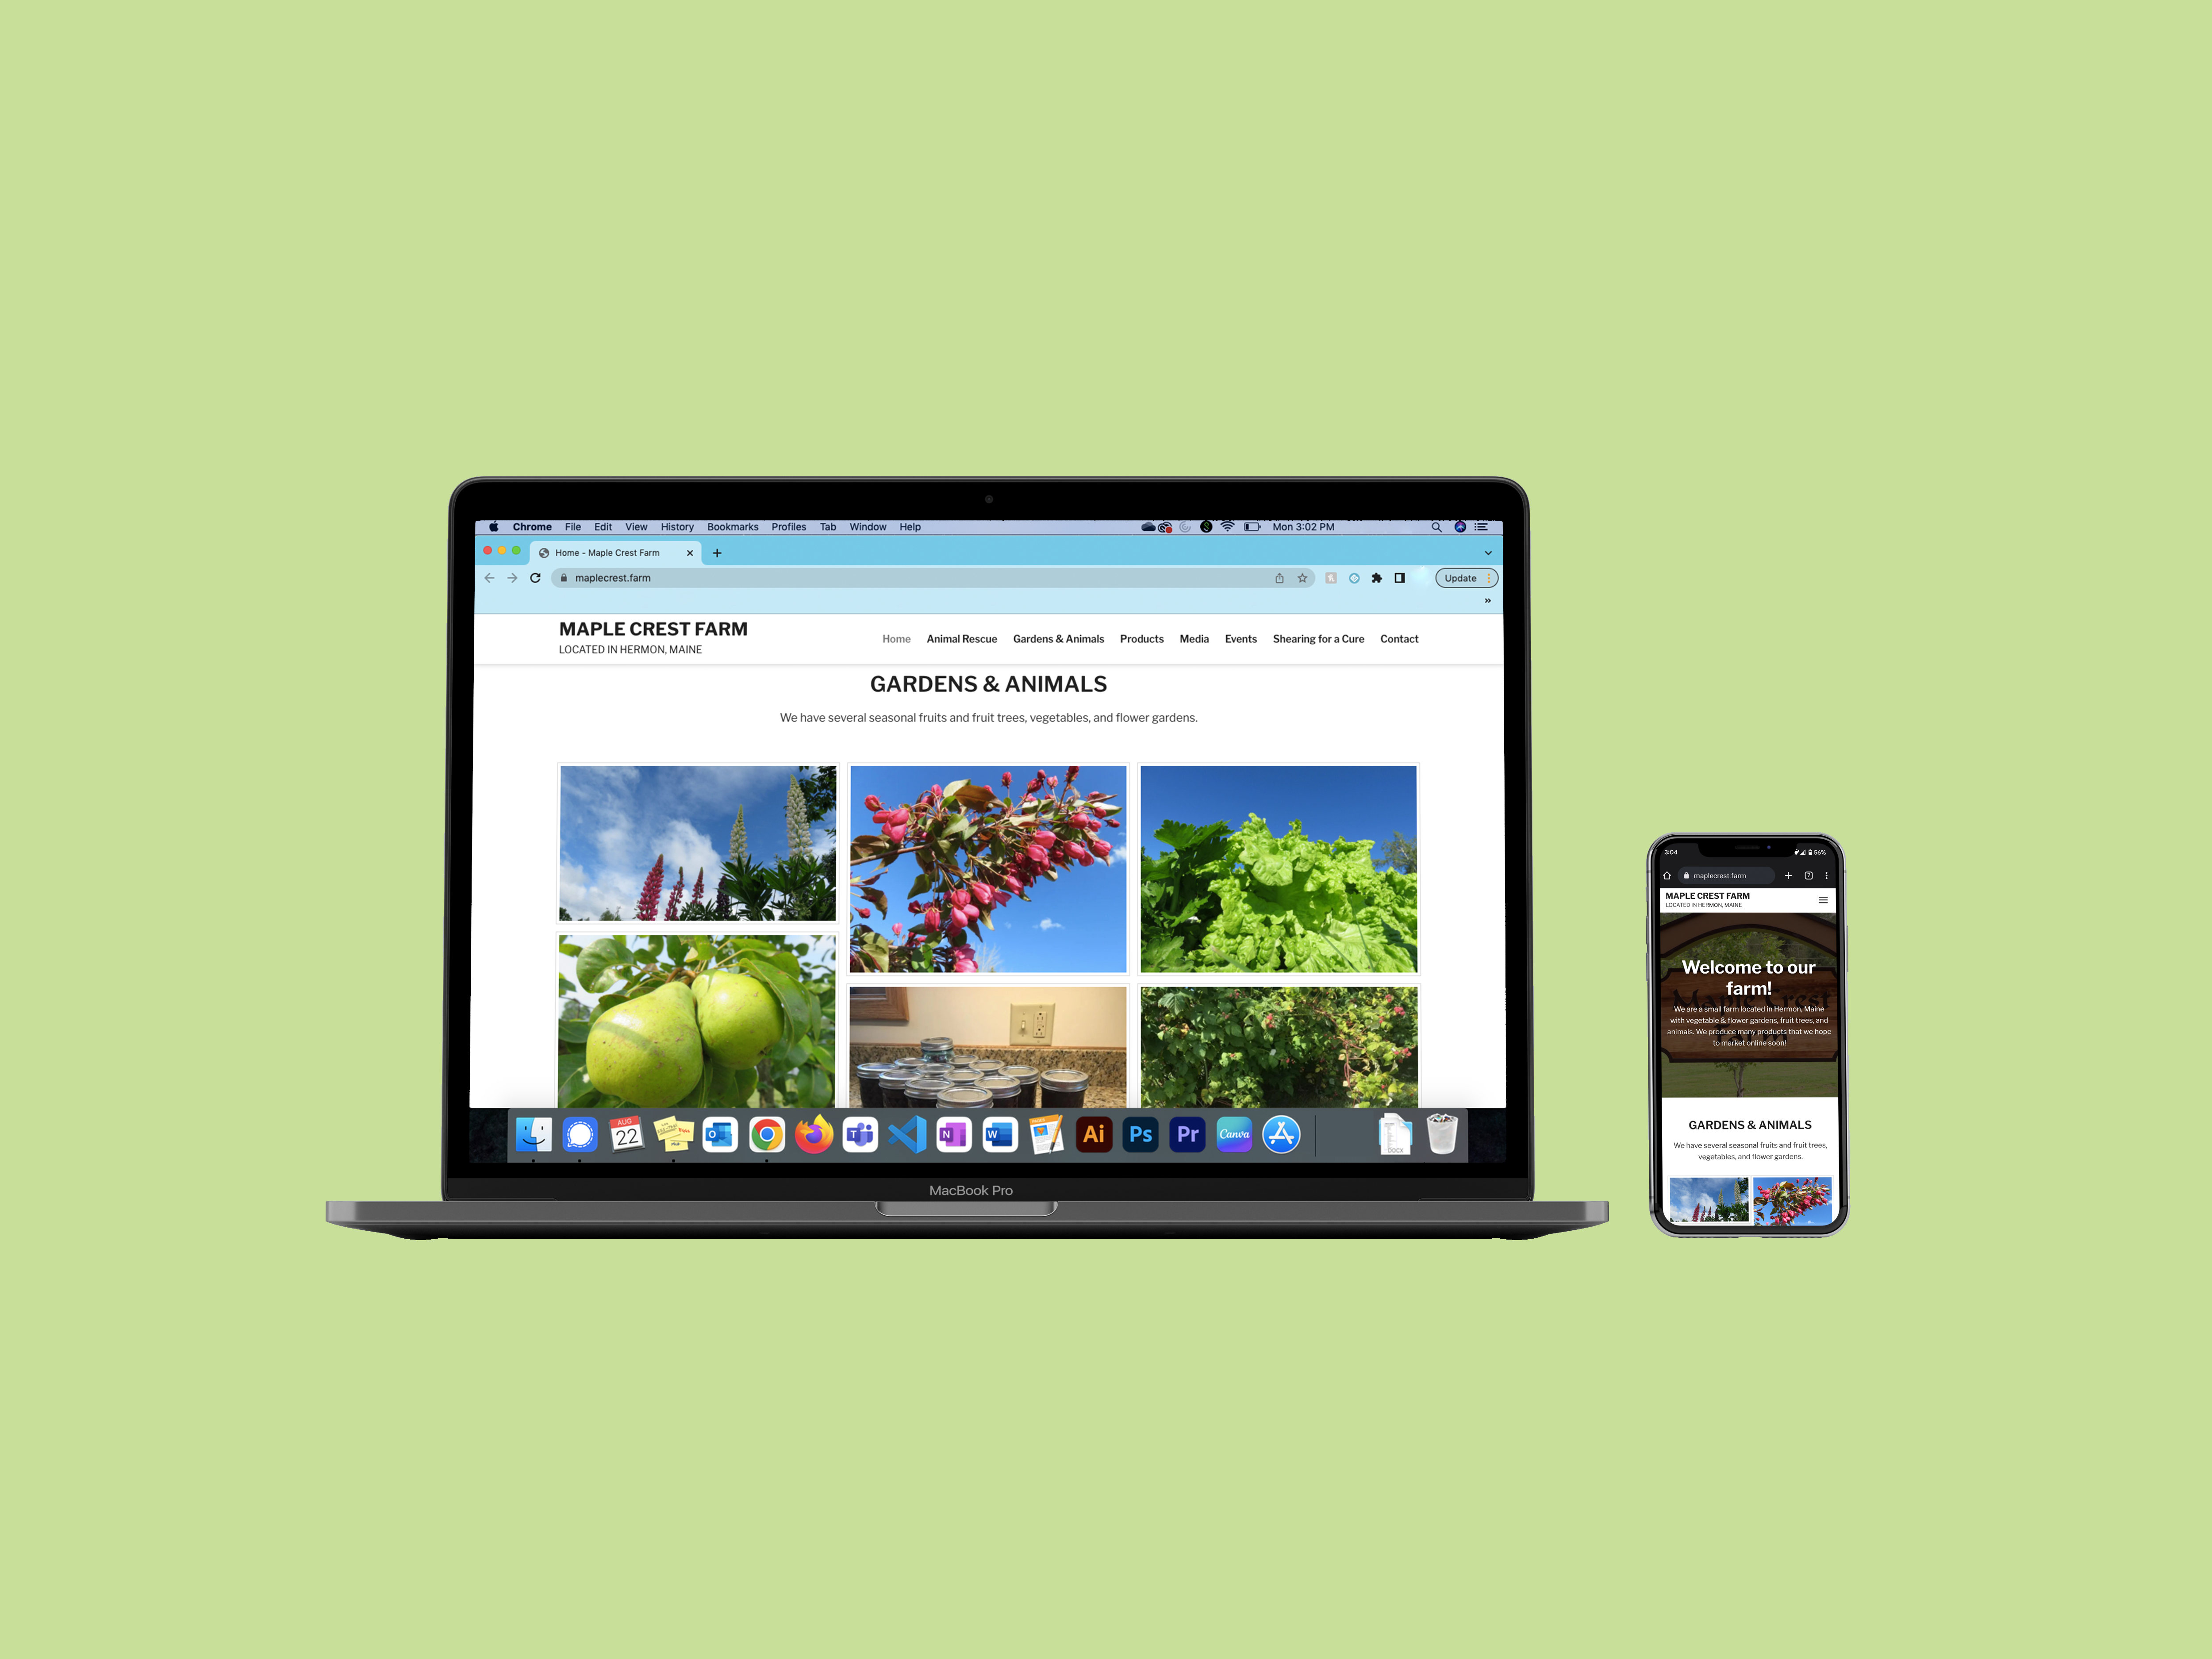 Maple Crest Farm website on a laptop and mobile device